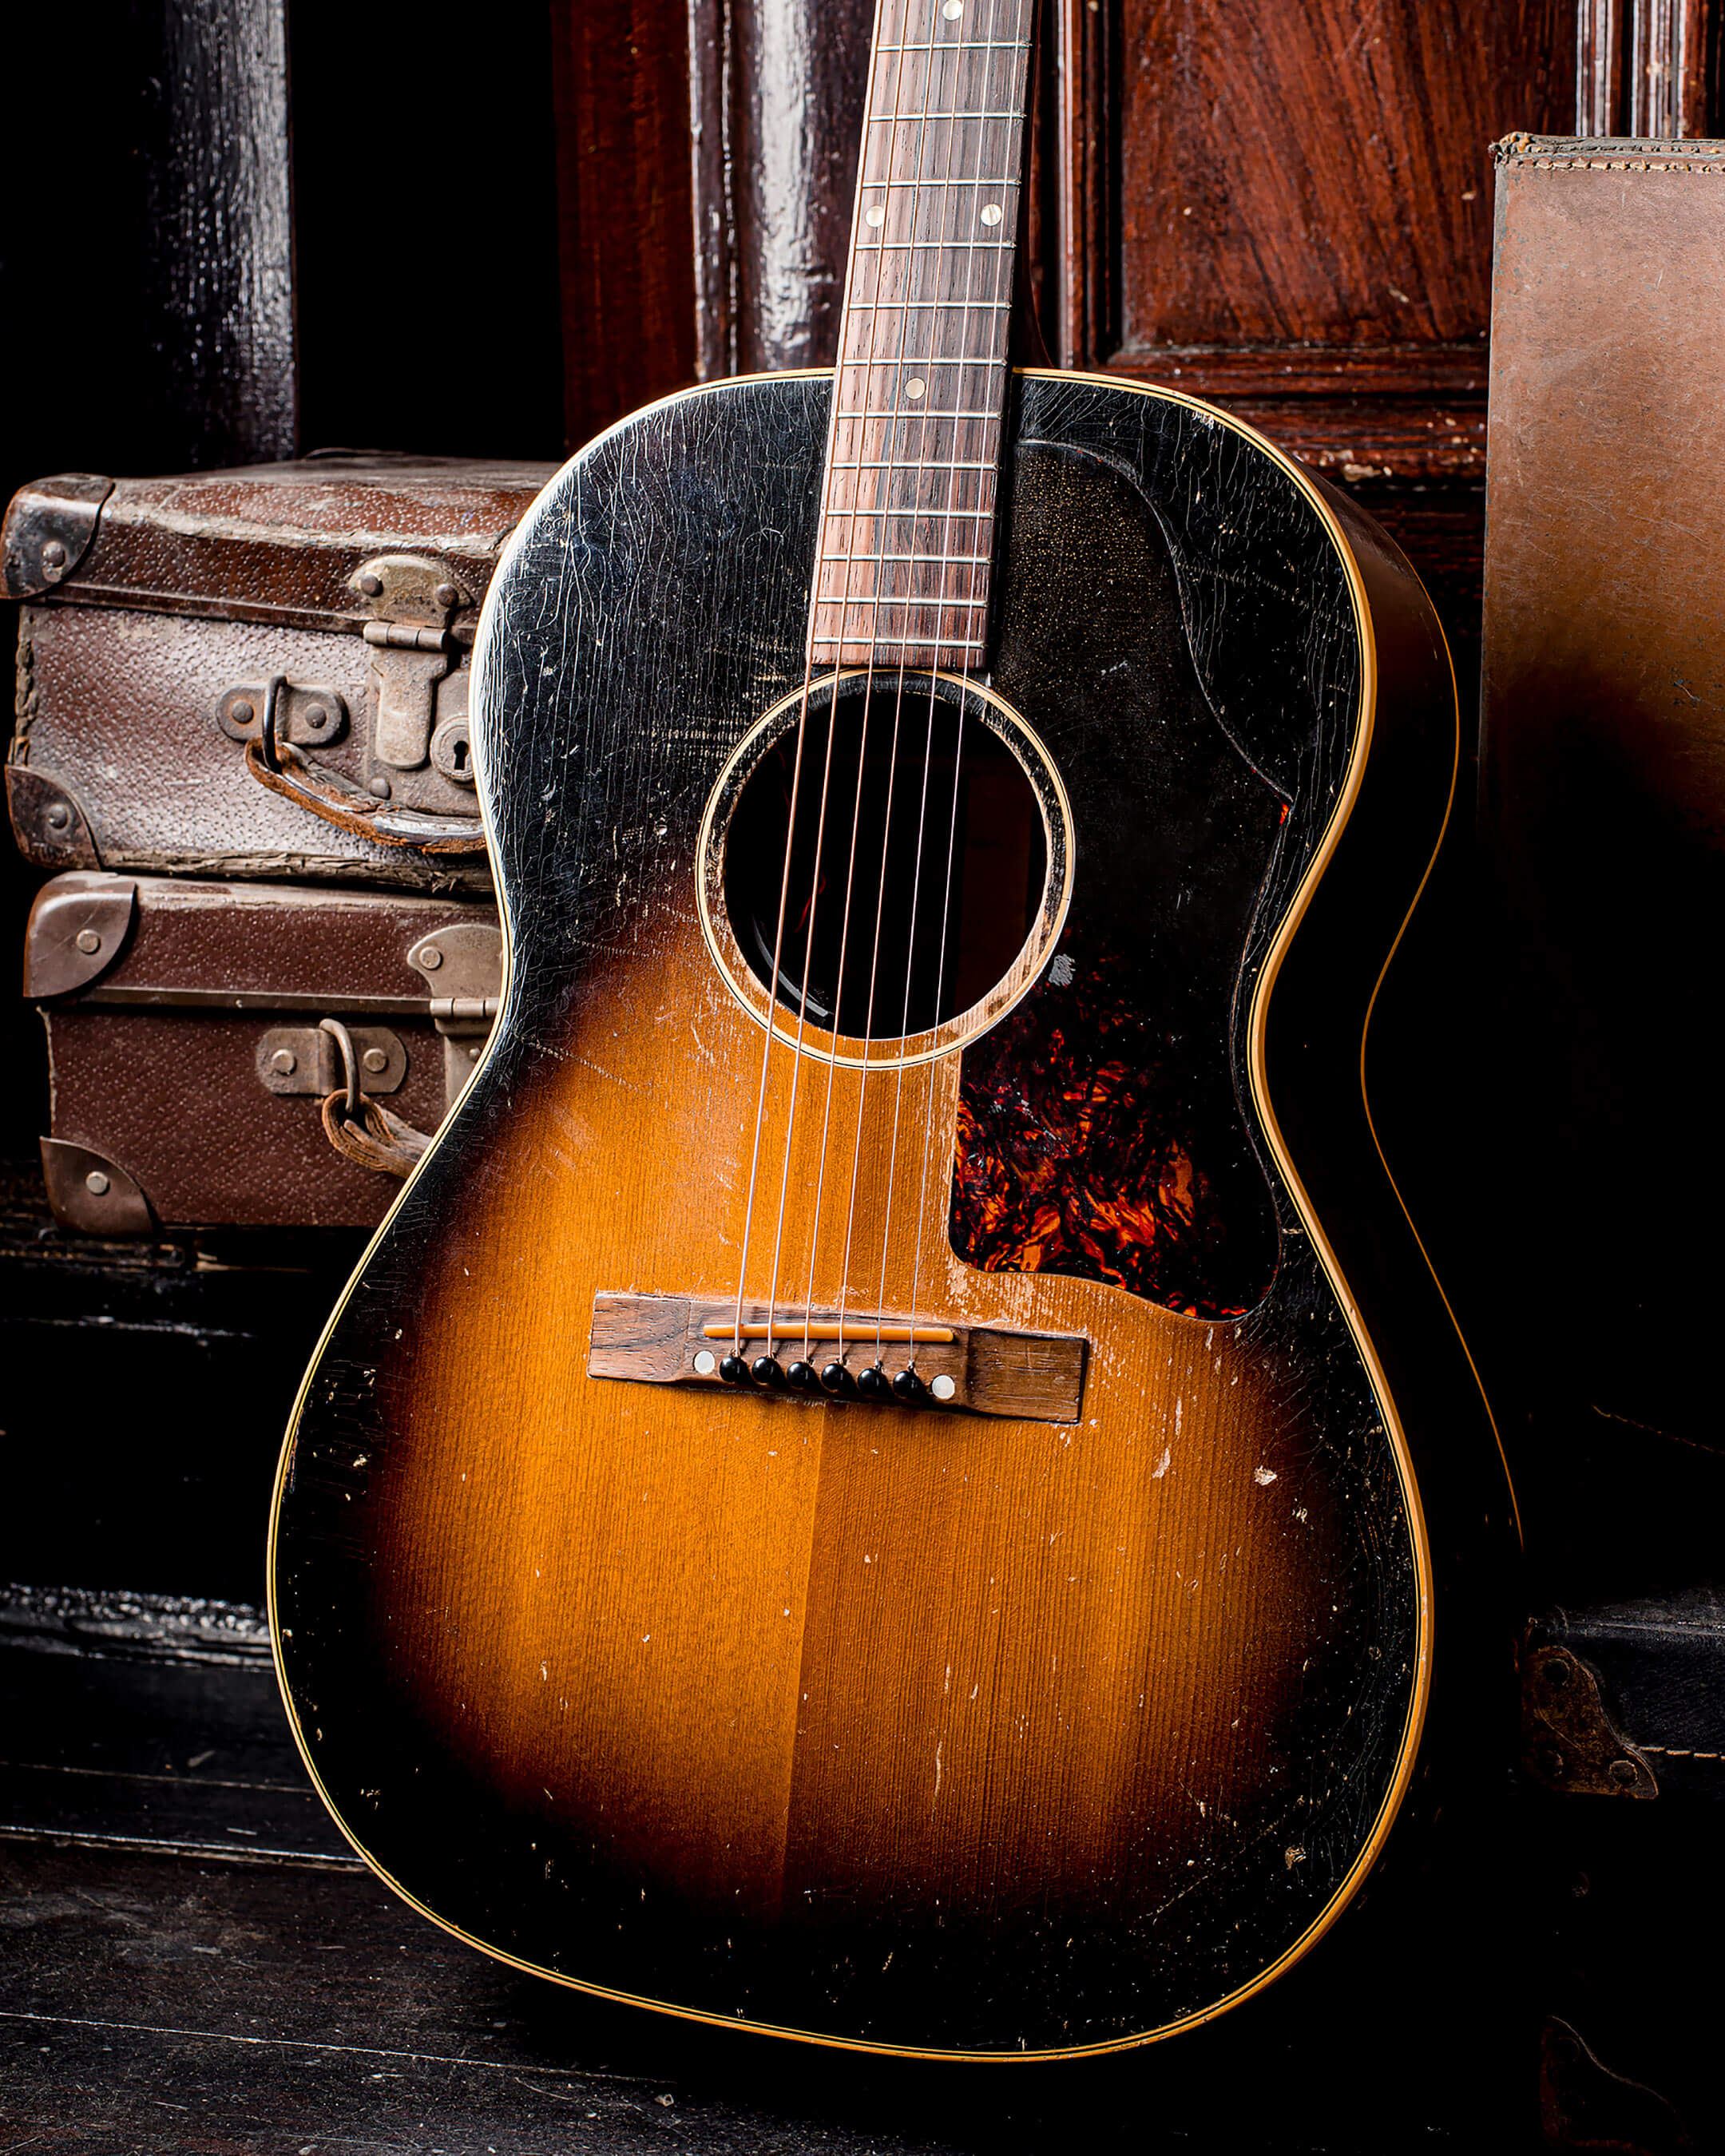 James Walbourne's 1952 Gibson LG-2